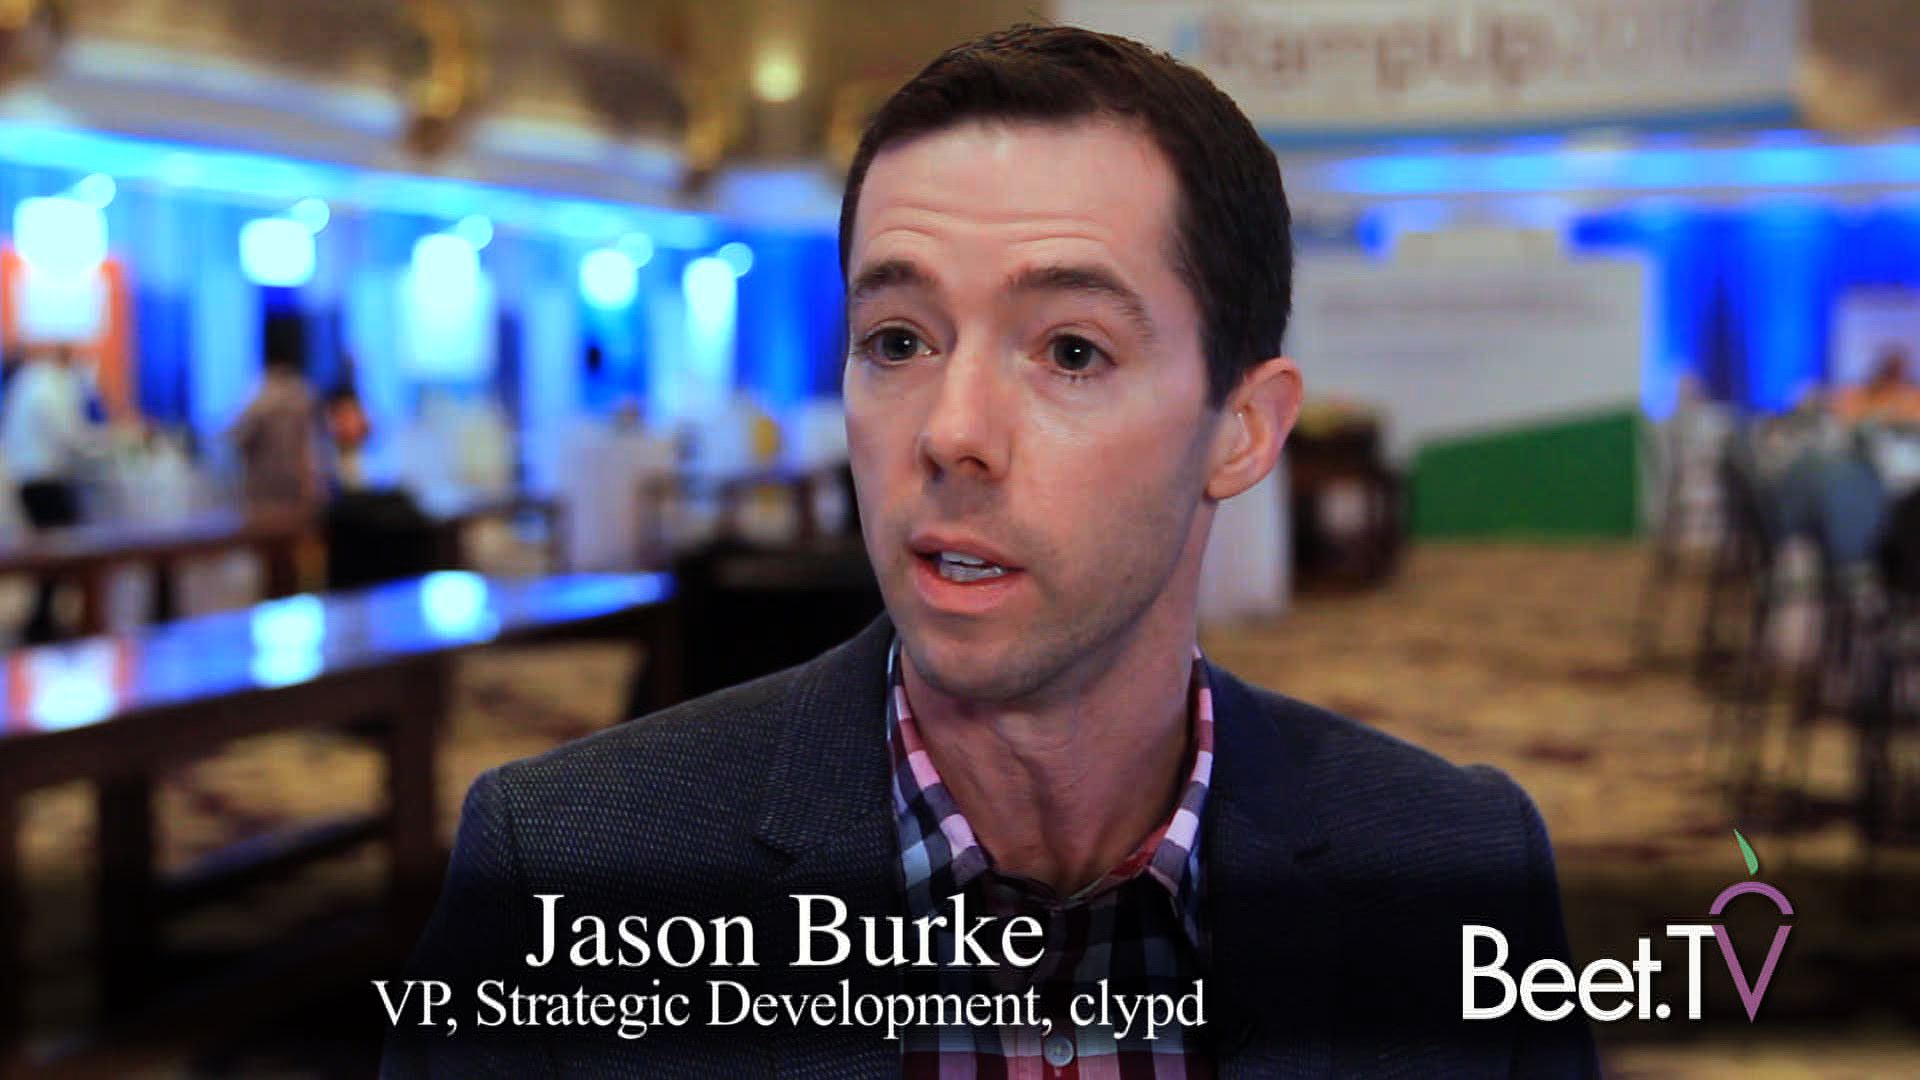 Clypd Begins Decoupling Its Tech To Expand Clients: Burke